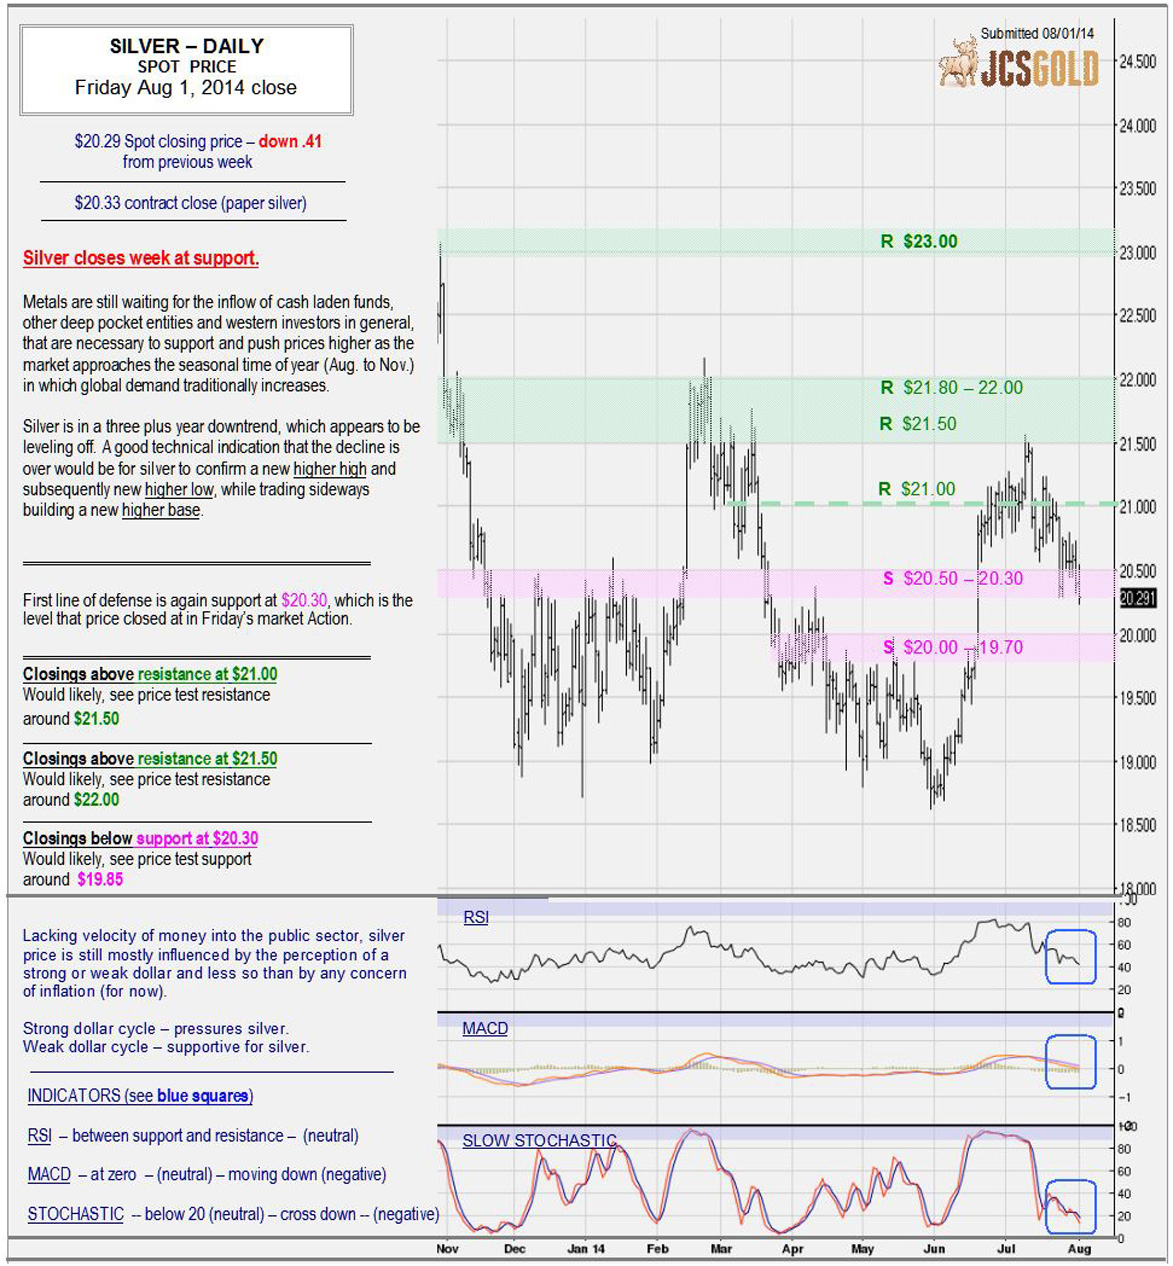 Aug 1, 2014 chart & commentary